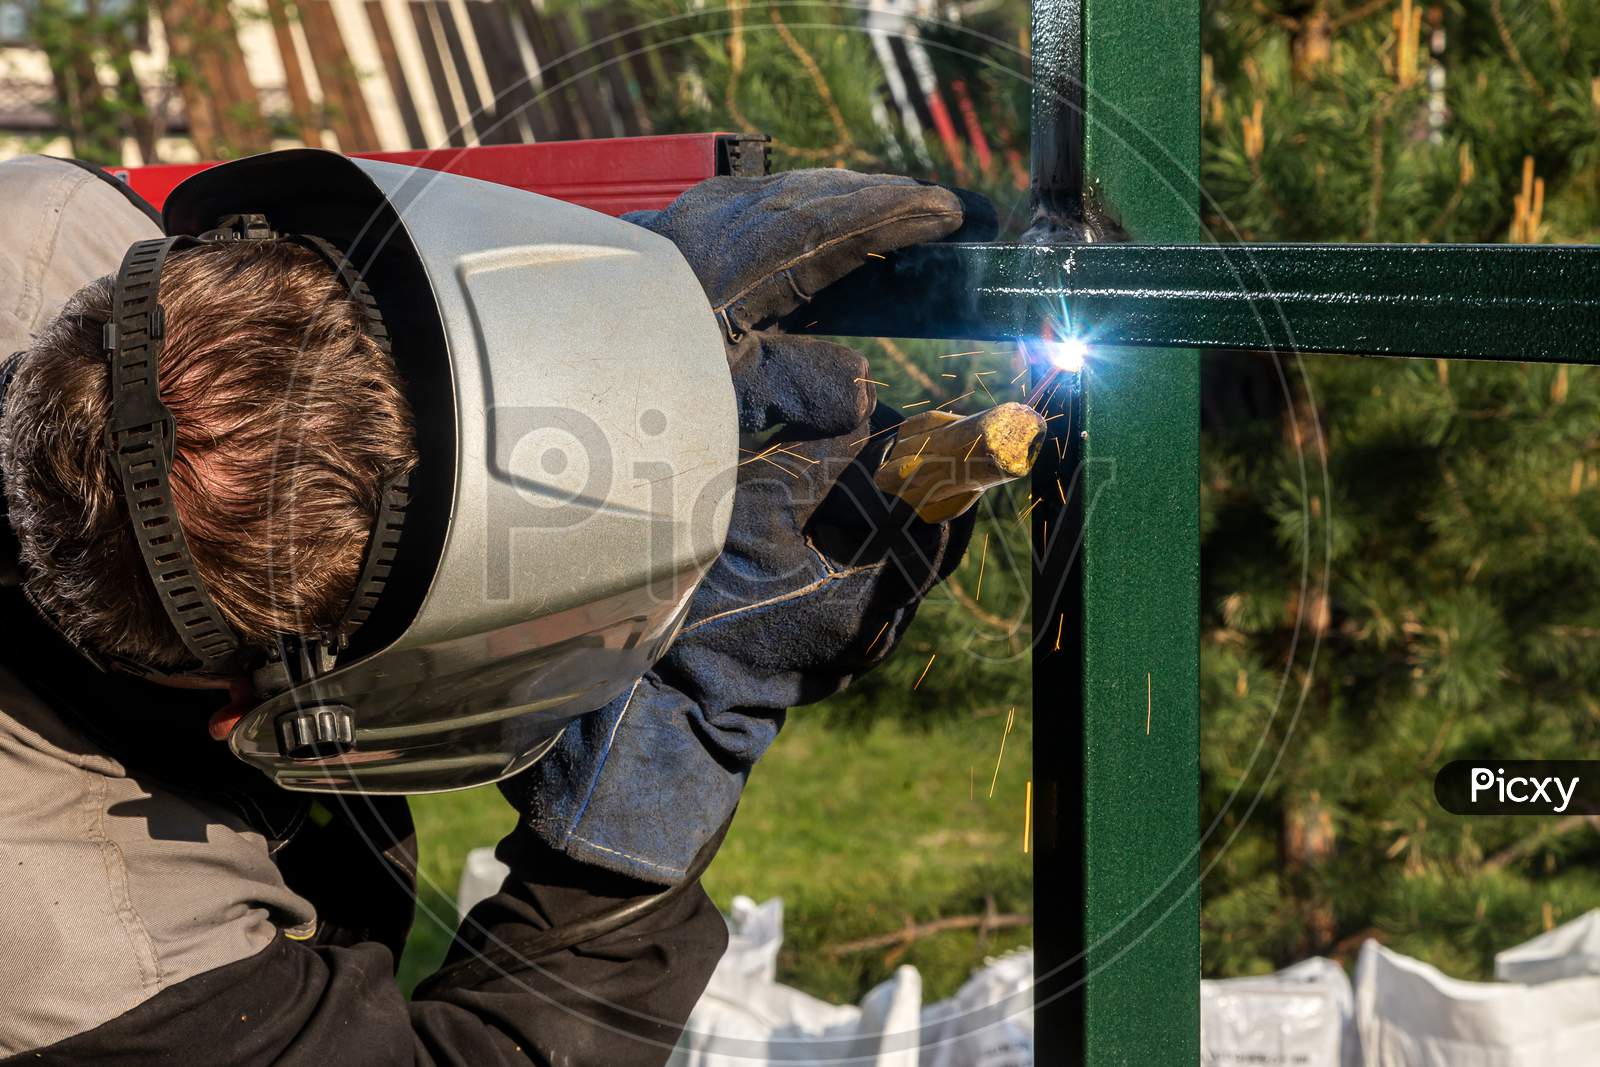 Close Up Of A Young  Man Welder In  Uniform, Welding Mask And Welders Leathers, Weld  Metal  With A  Welding Machine At The Construction  Of A Fence In Summer Day Putside In The Village